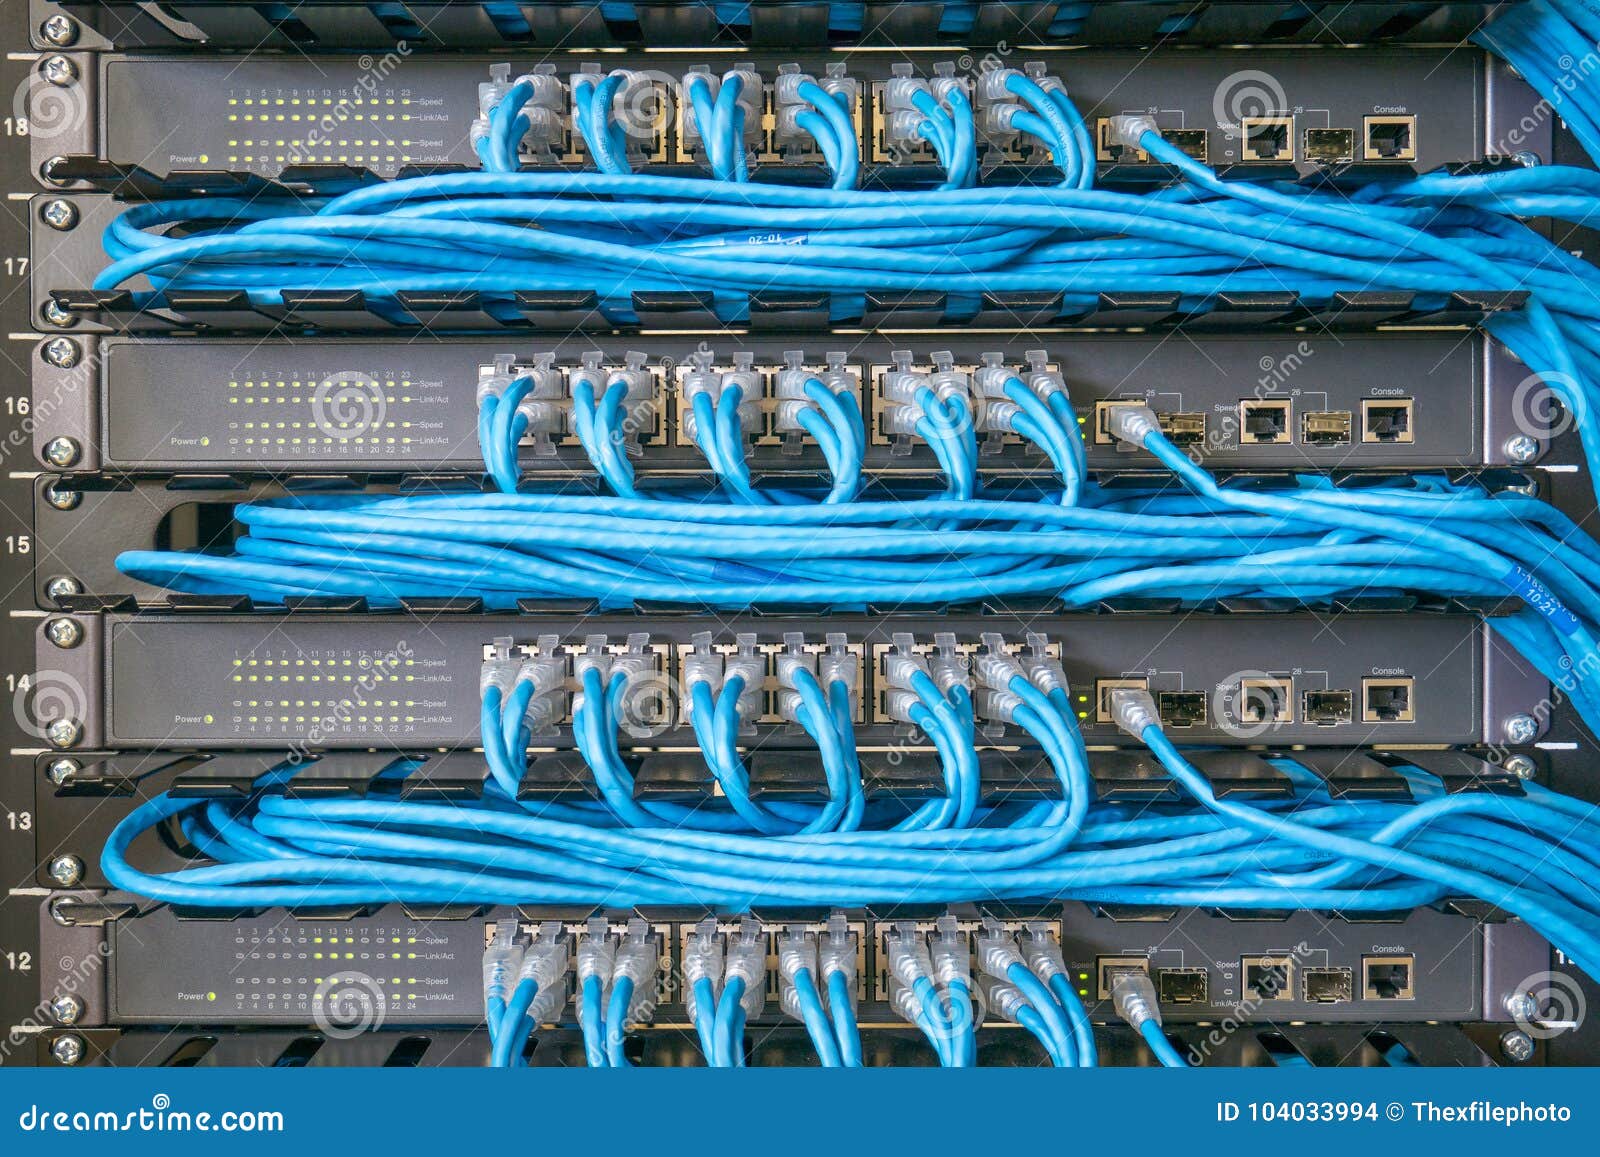 Network Switch And Ethernet Cables Stock Photo Image Of Internet